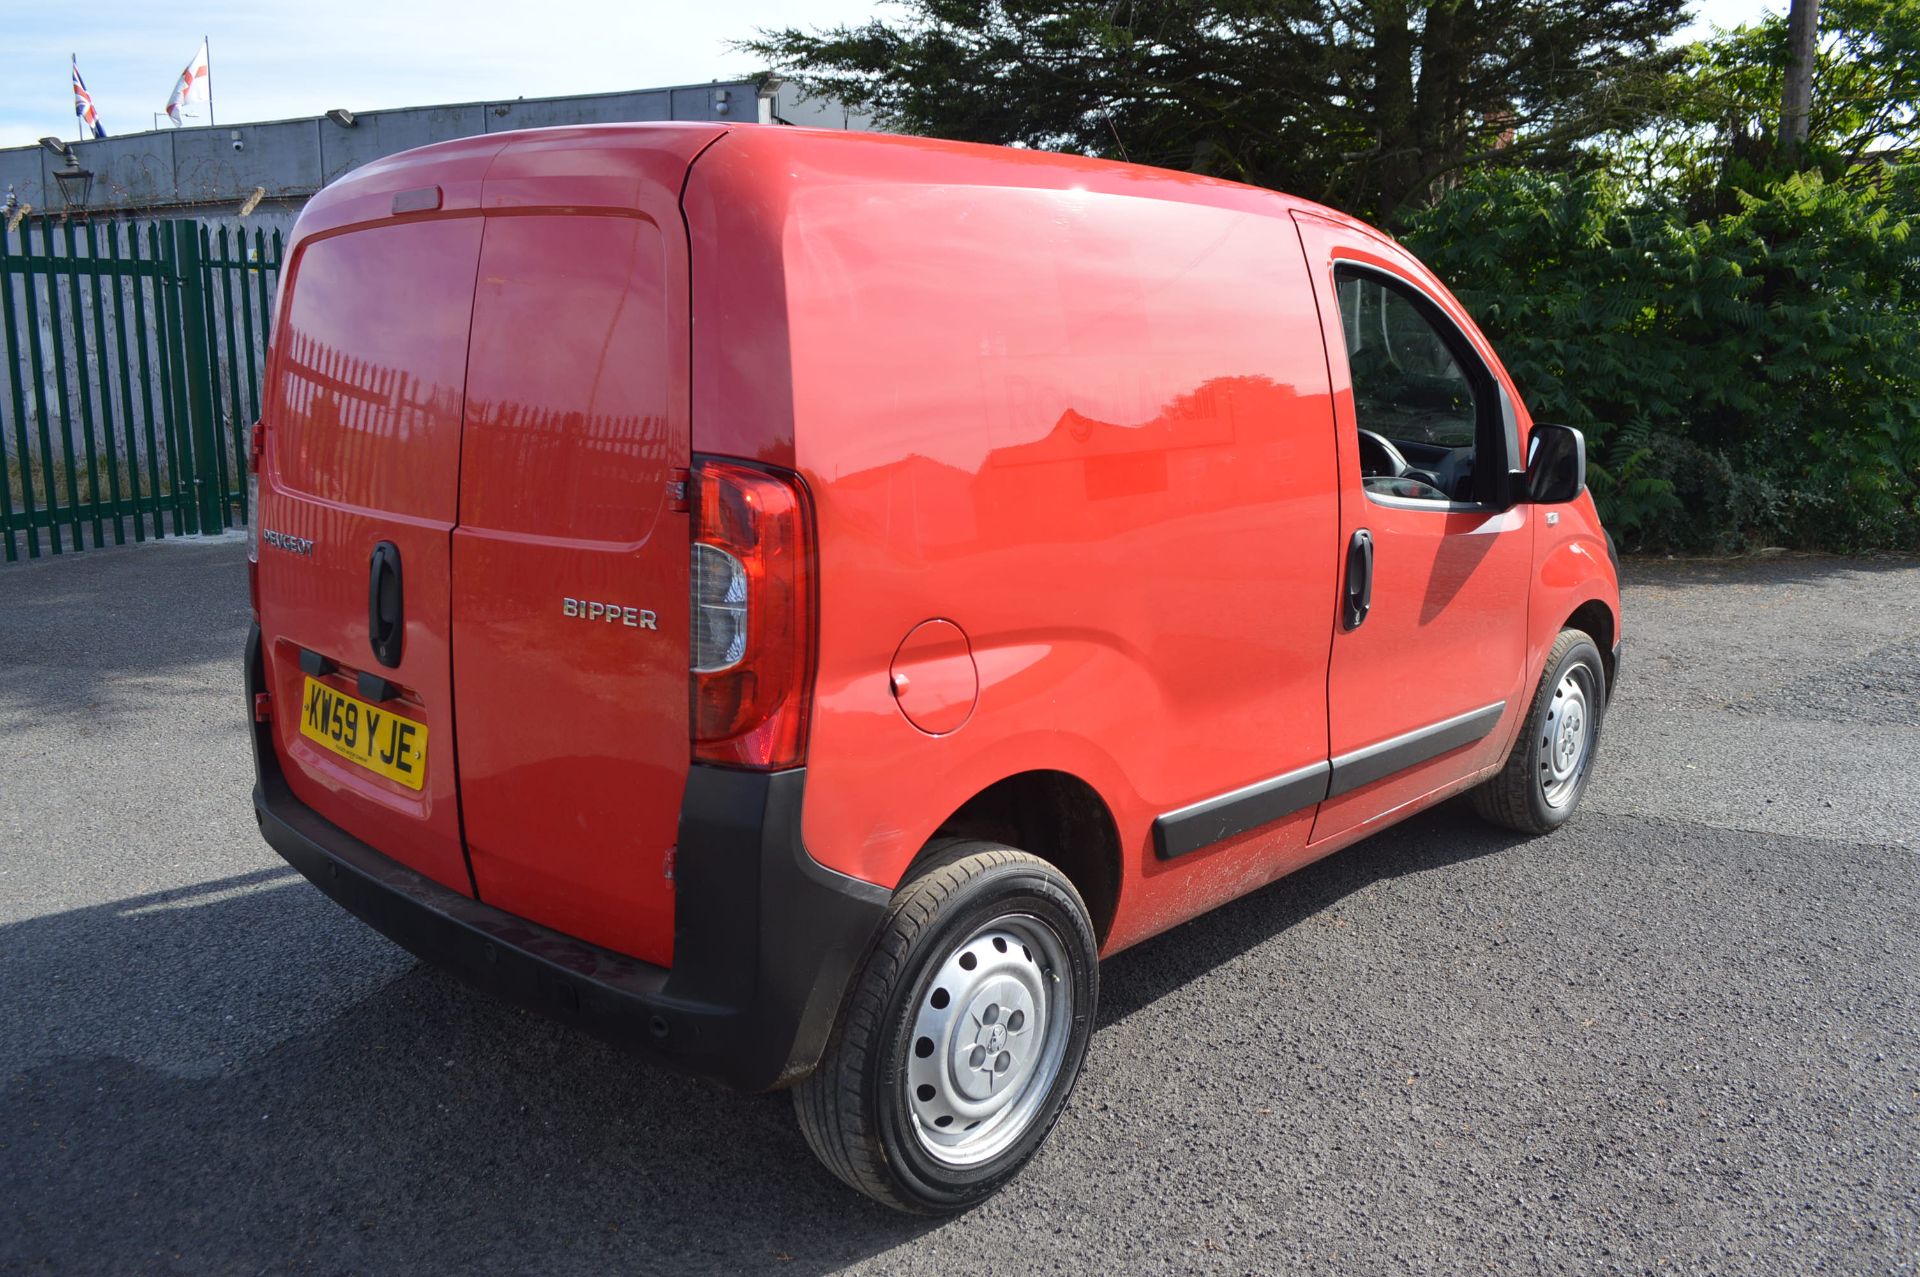 2010/59 REG PEUGEOT BIPPER S HDI - 1 OWNER FROM NEW, ROYAL MAIL *NO VAT* - Image 6 of 23